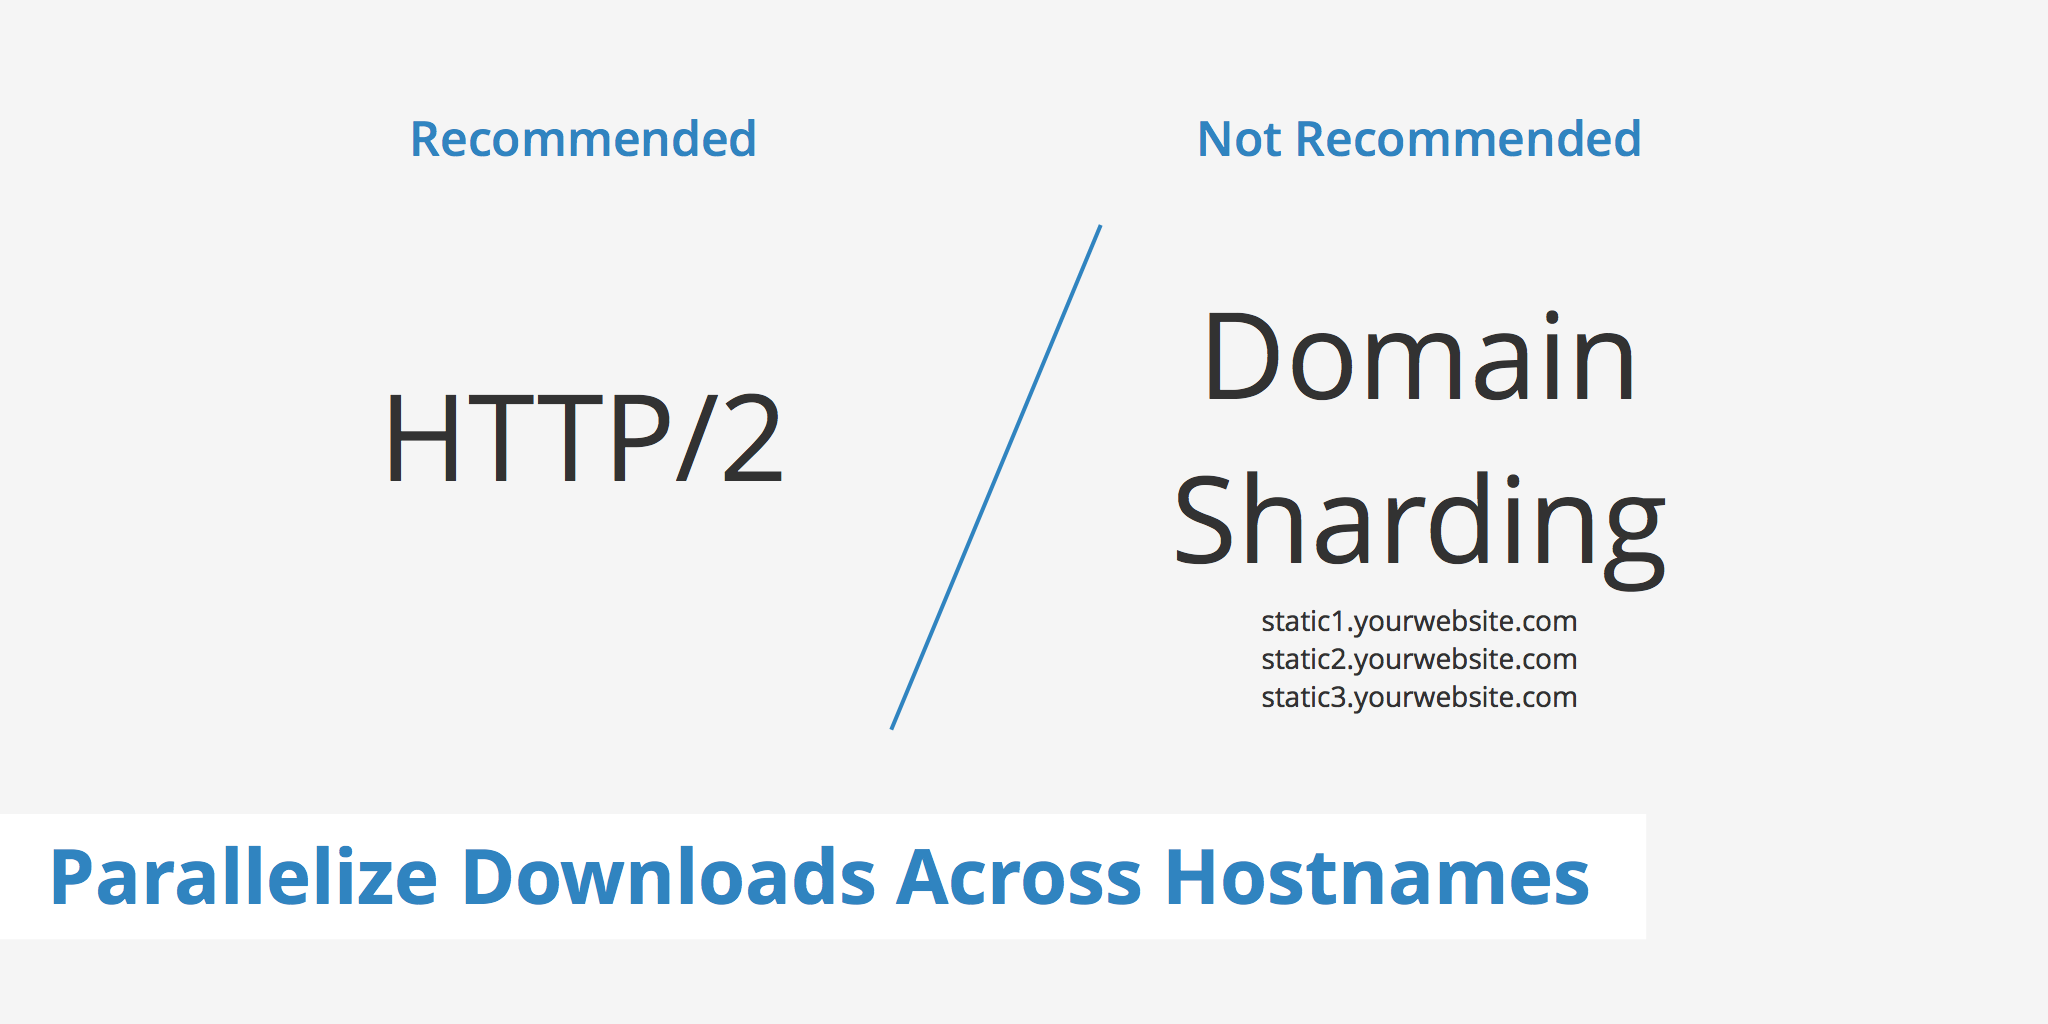 How to Parallelize Downloads Across Hostnames